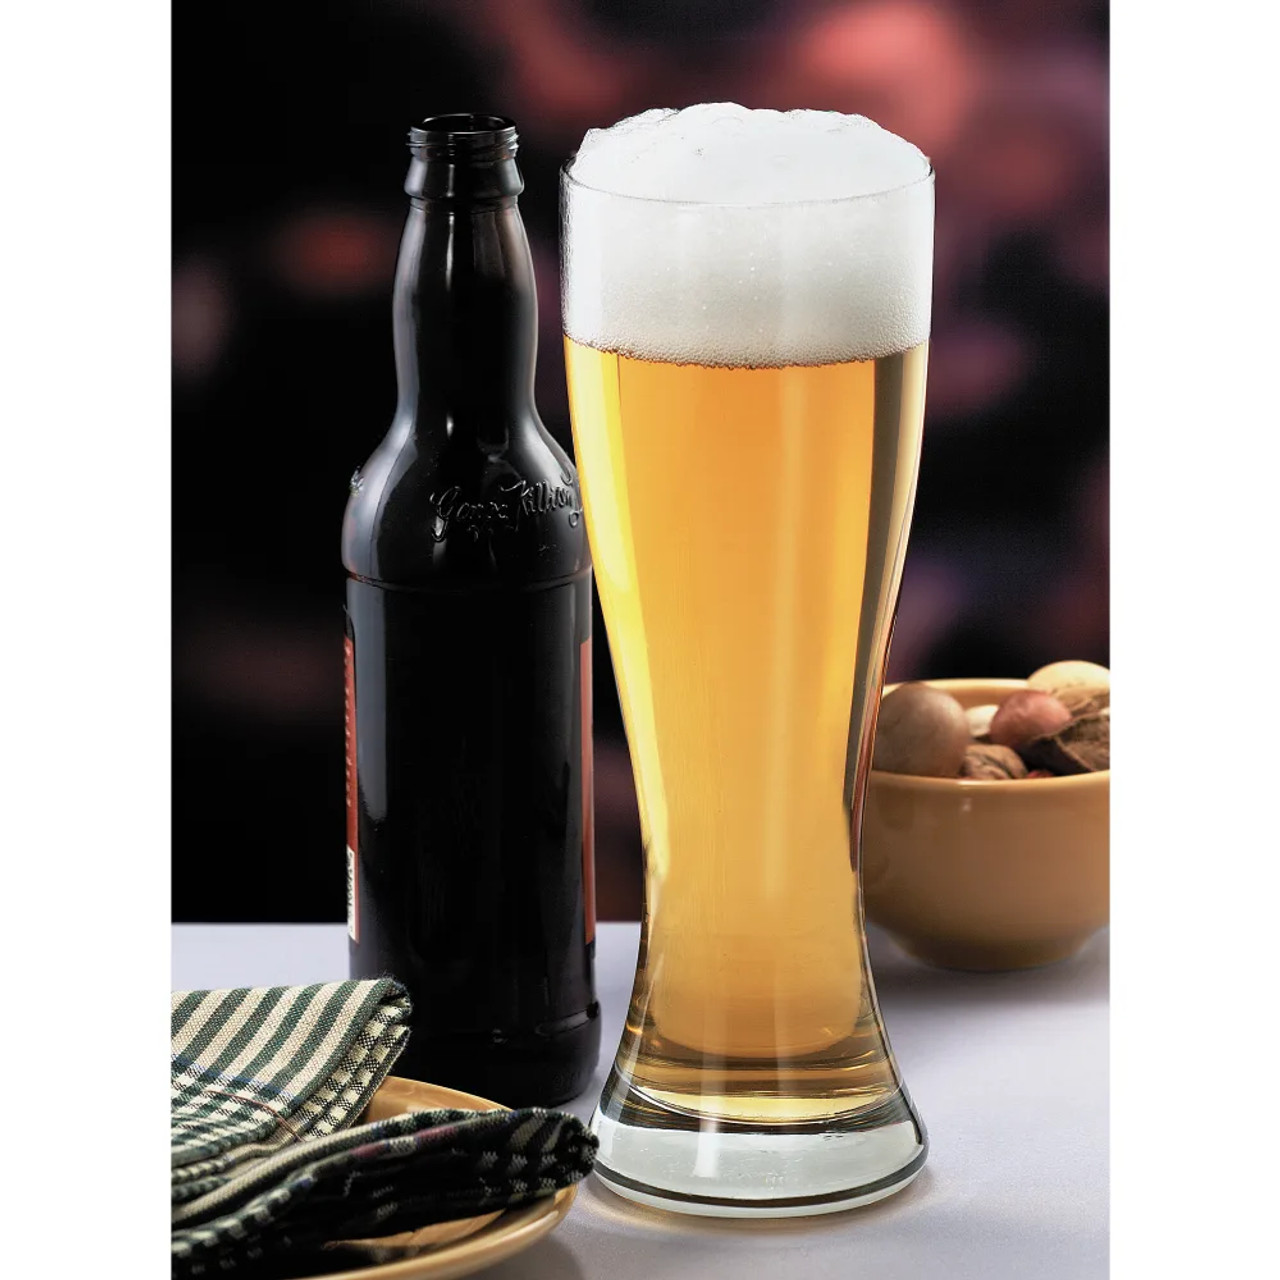 Libbey 1623 23 oz Giant Beer Glass - Safedge Rim Guarantee (12/Case) - Chicken Pieces